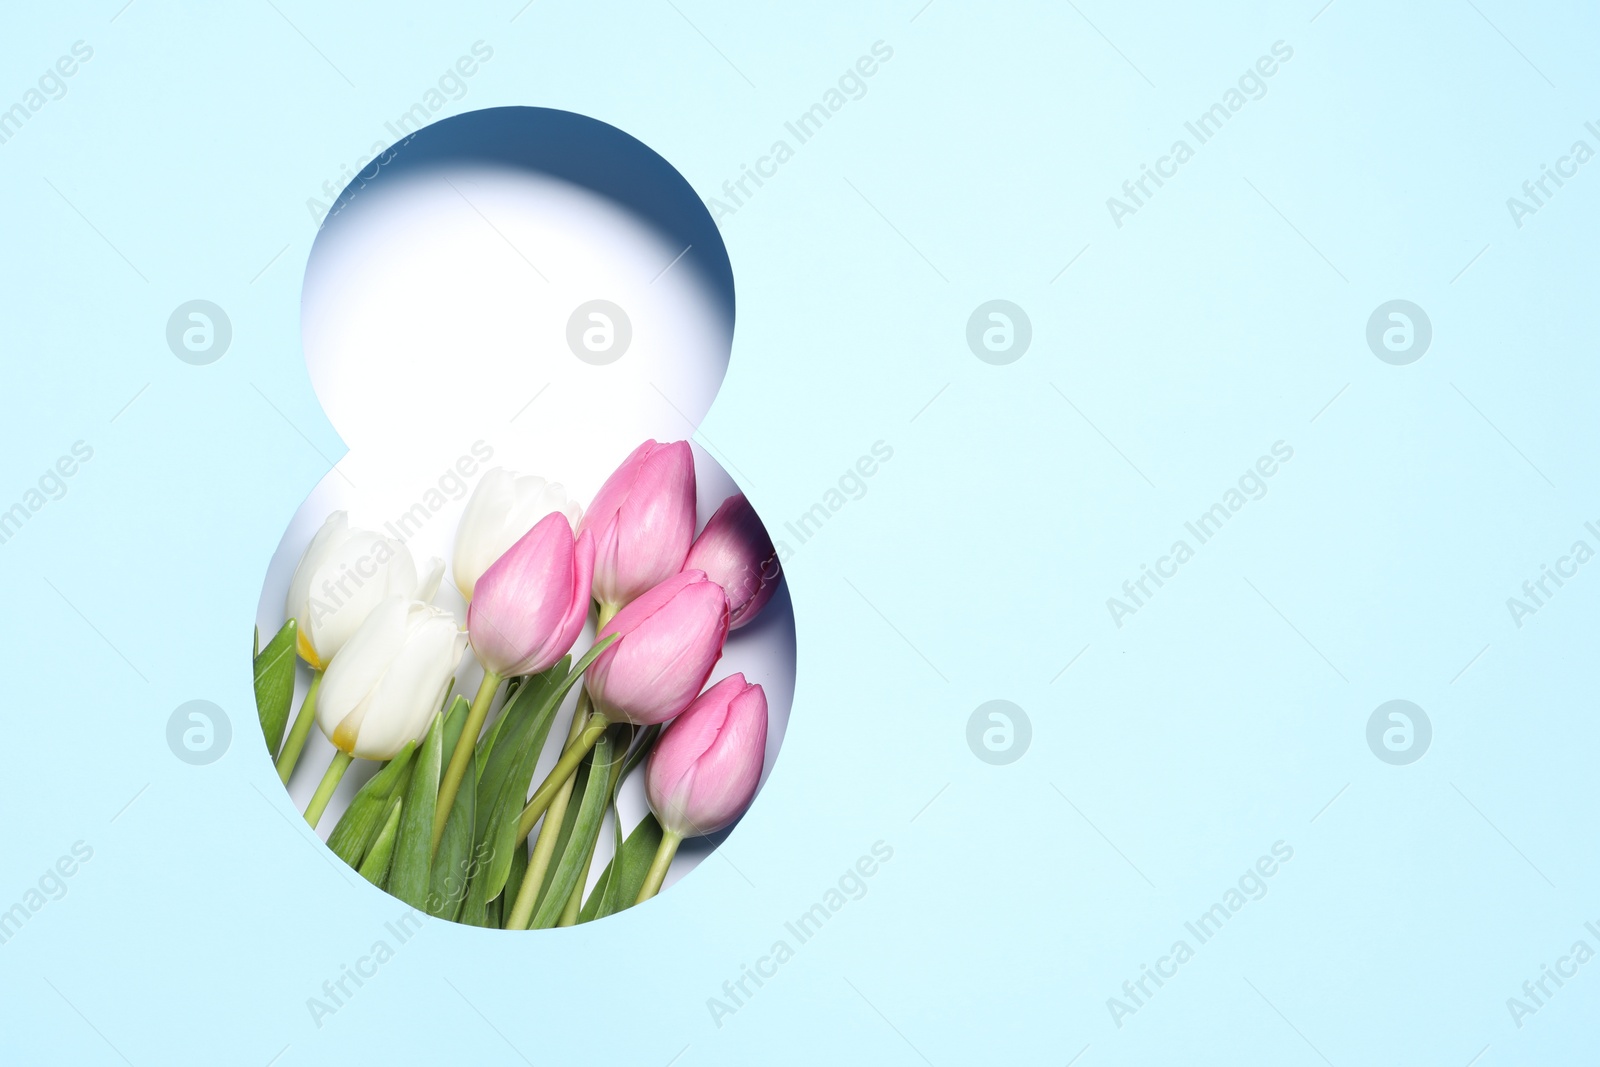 Photo of 8 March greeting card design with tulips and space for text, top view. Happy International Women's Day